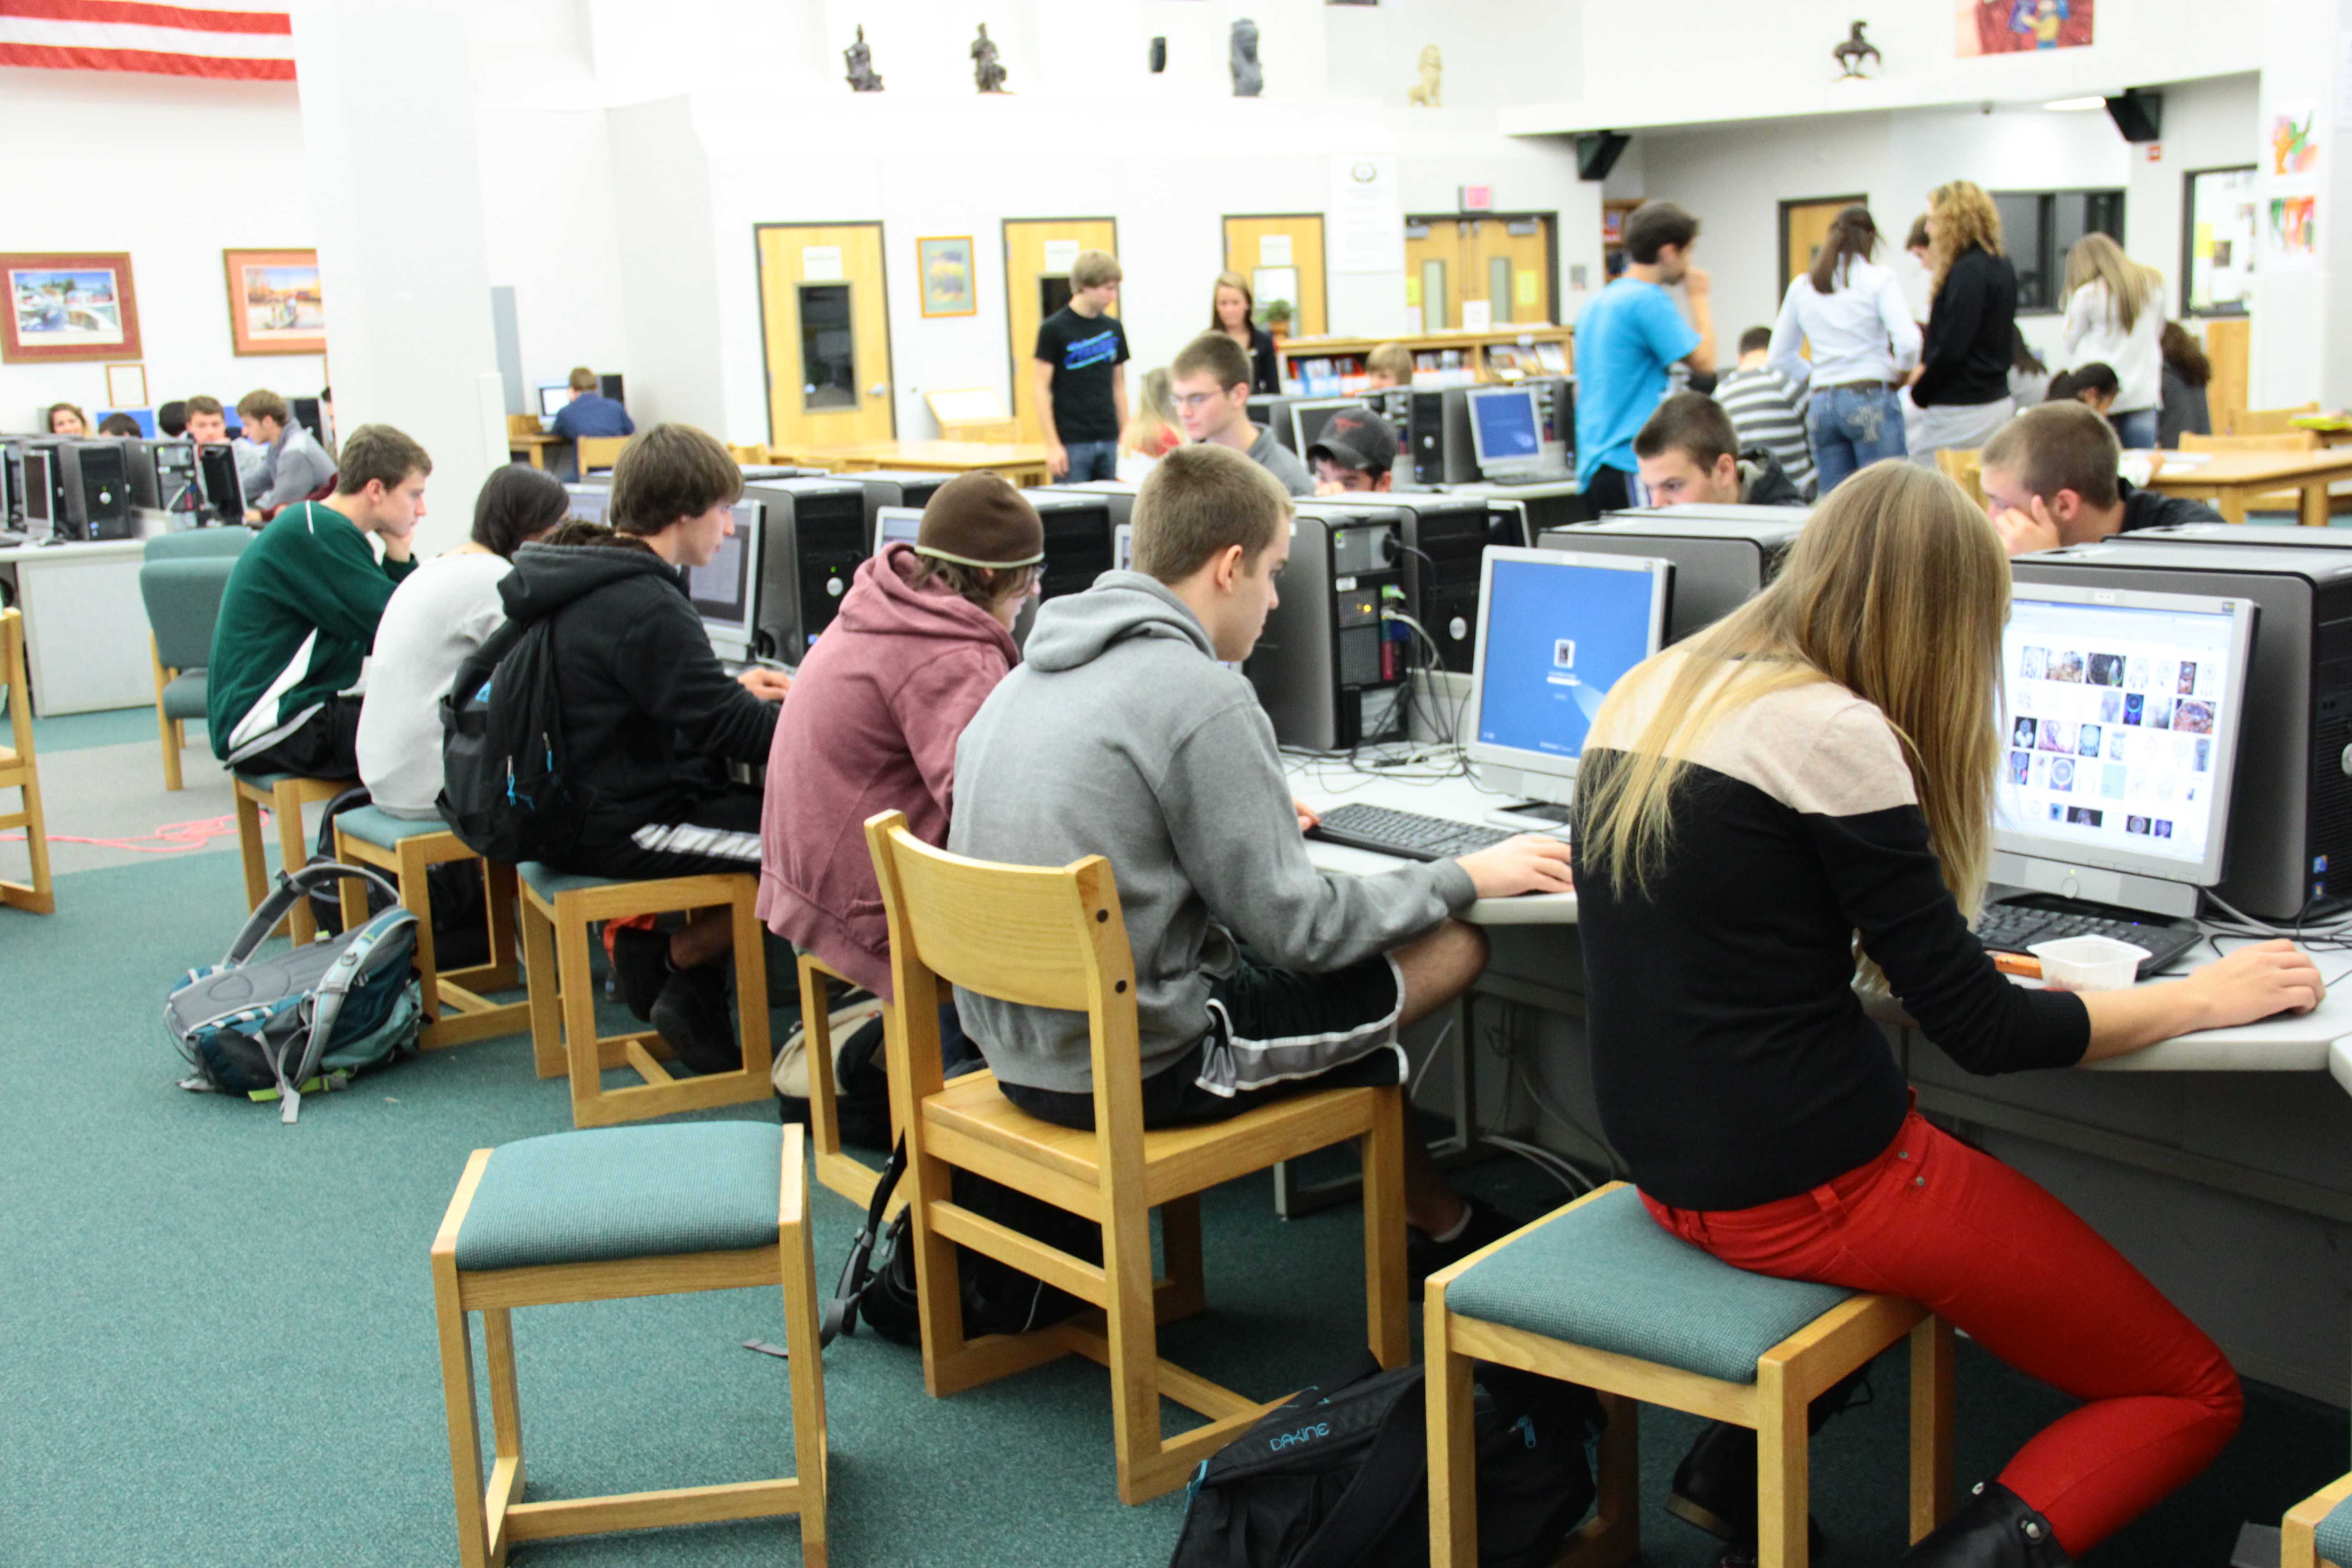 A busy day in the RBHS library. Photo by Carleigh Thrower